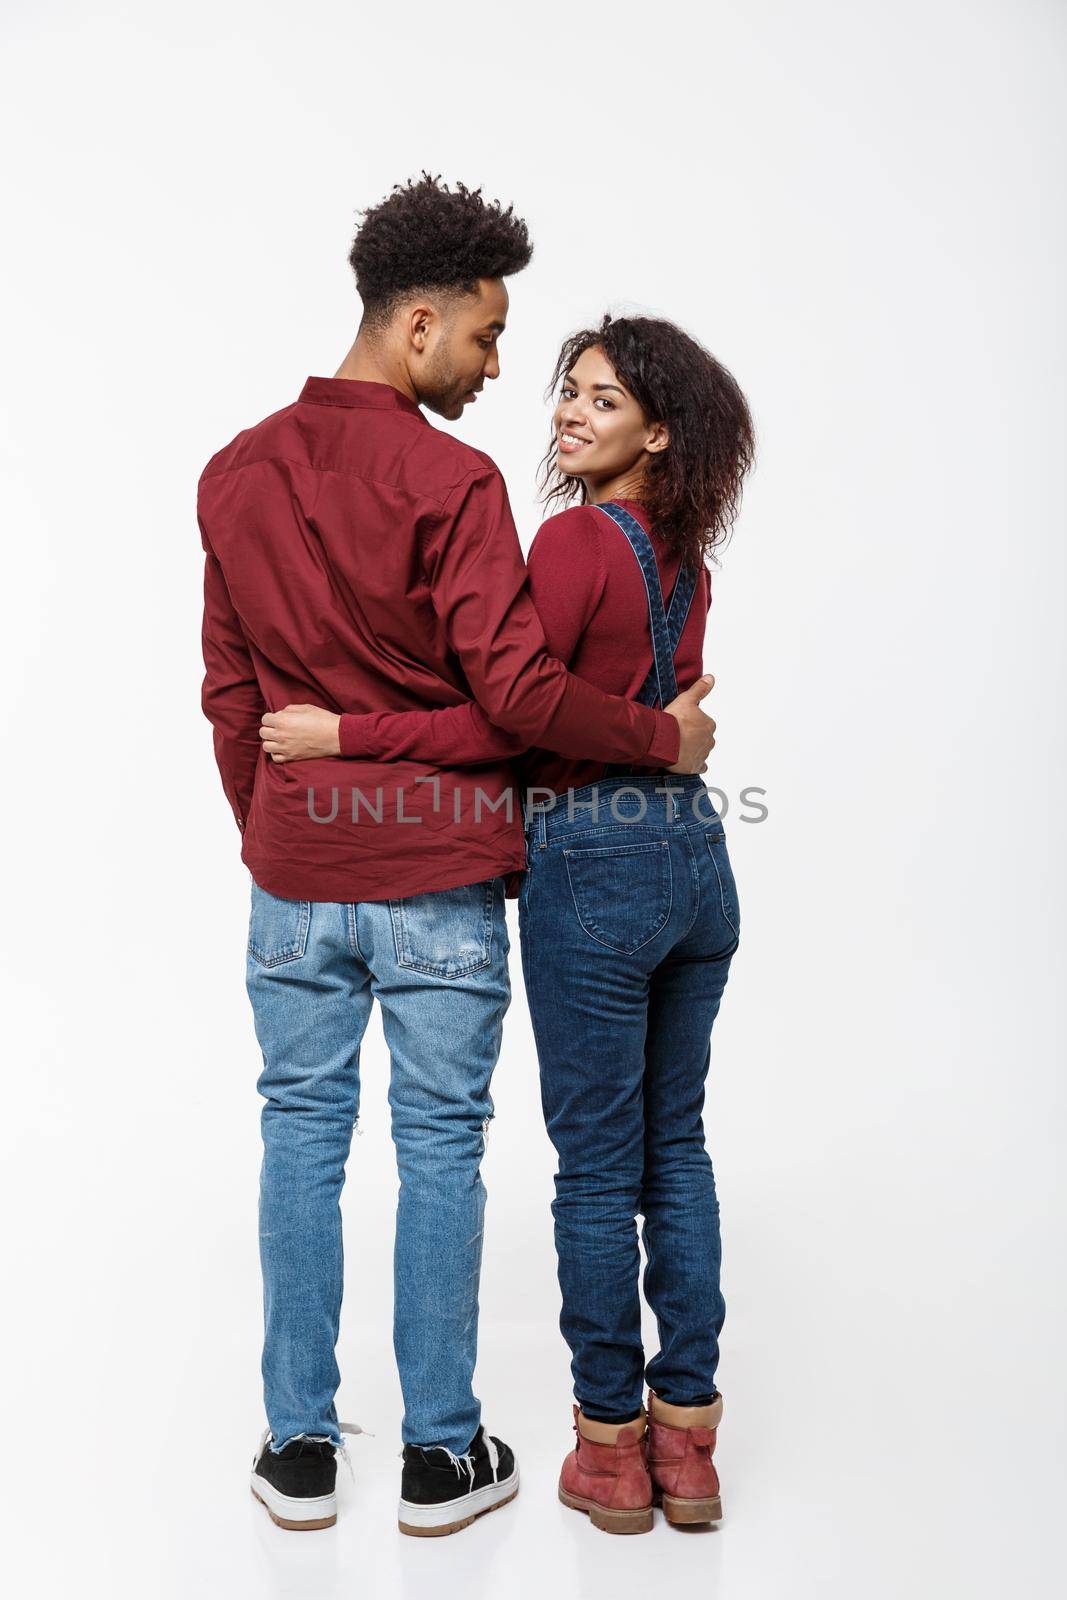 Full lenght back view of young African American couple hugging together isolated on white background.